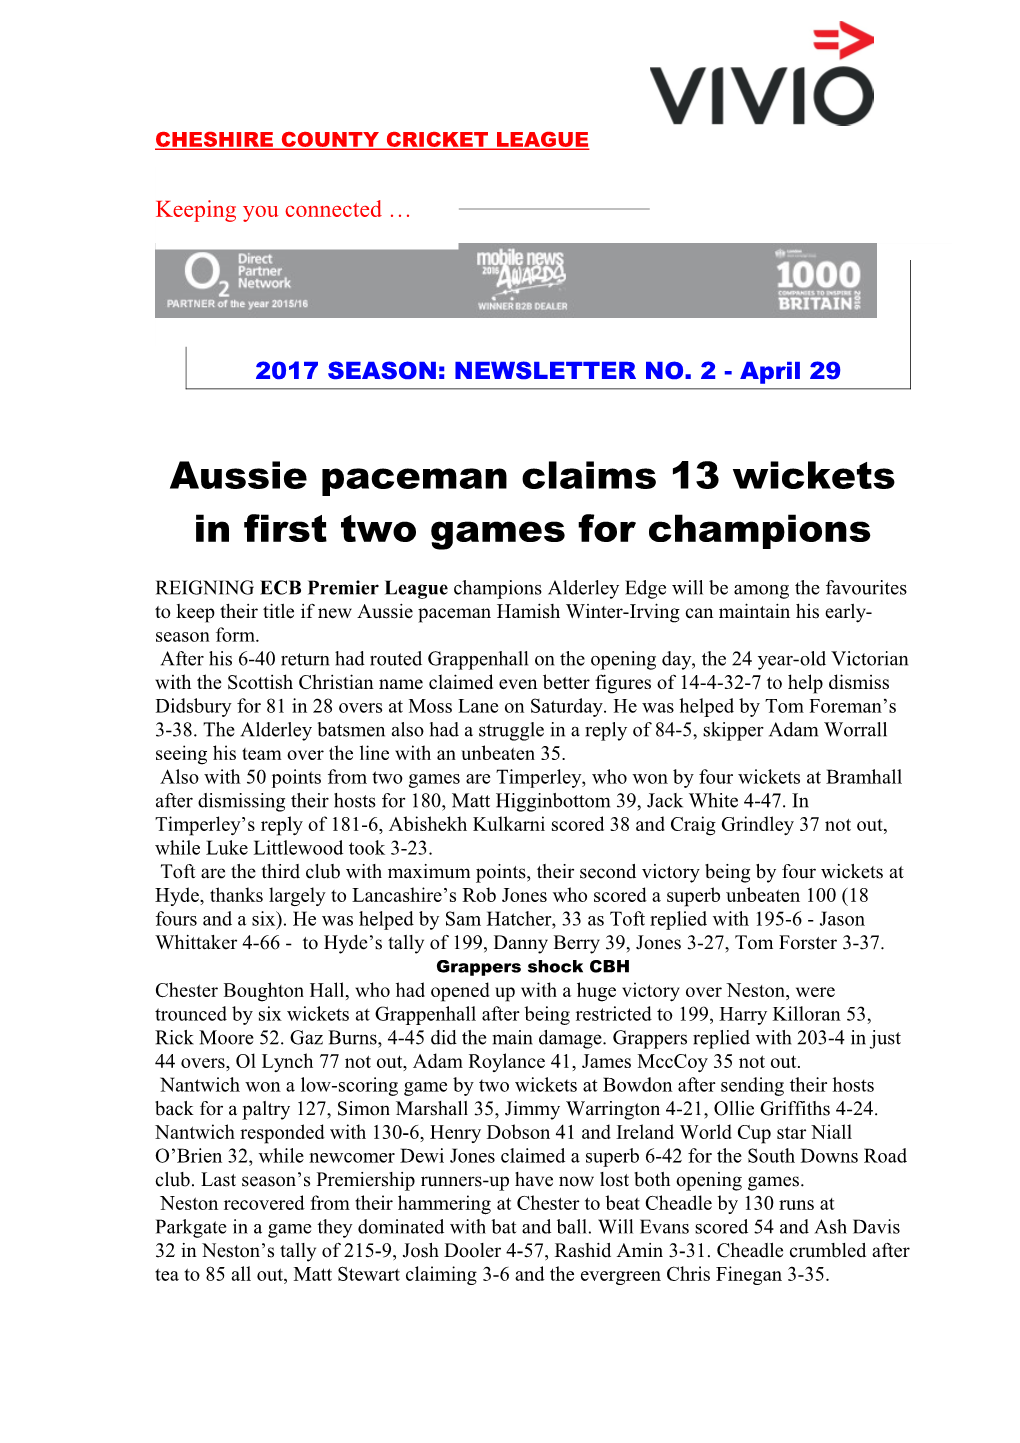 Aussie Paceman Claims 13 Wickets in First Two Games for Champions